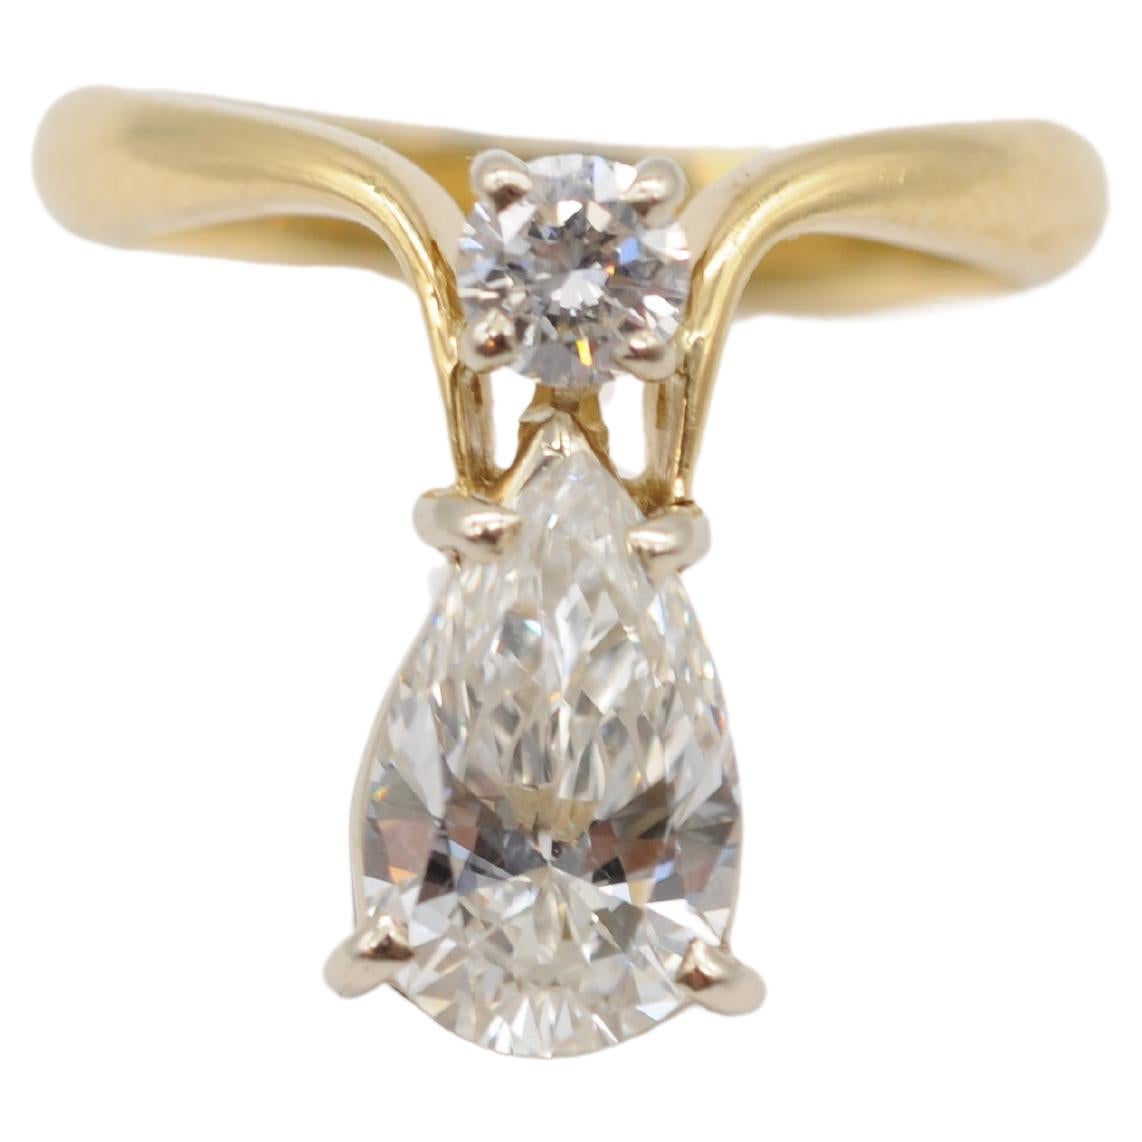 Majestic pear cut diamond engagement ring "Vs1" approx 1.25ct in 18k gold